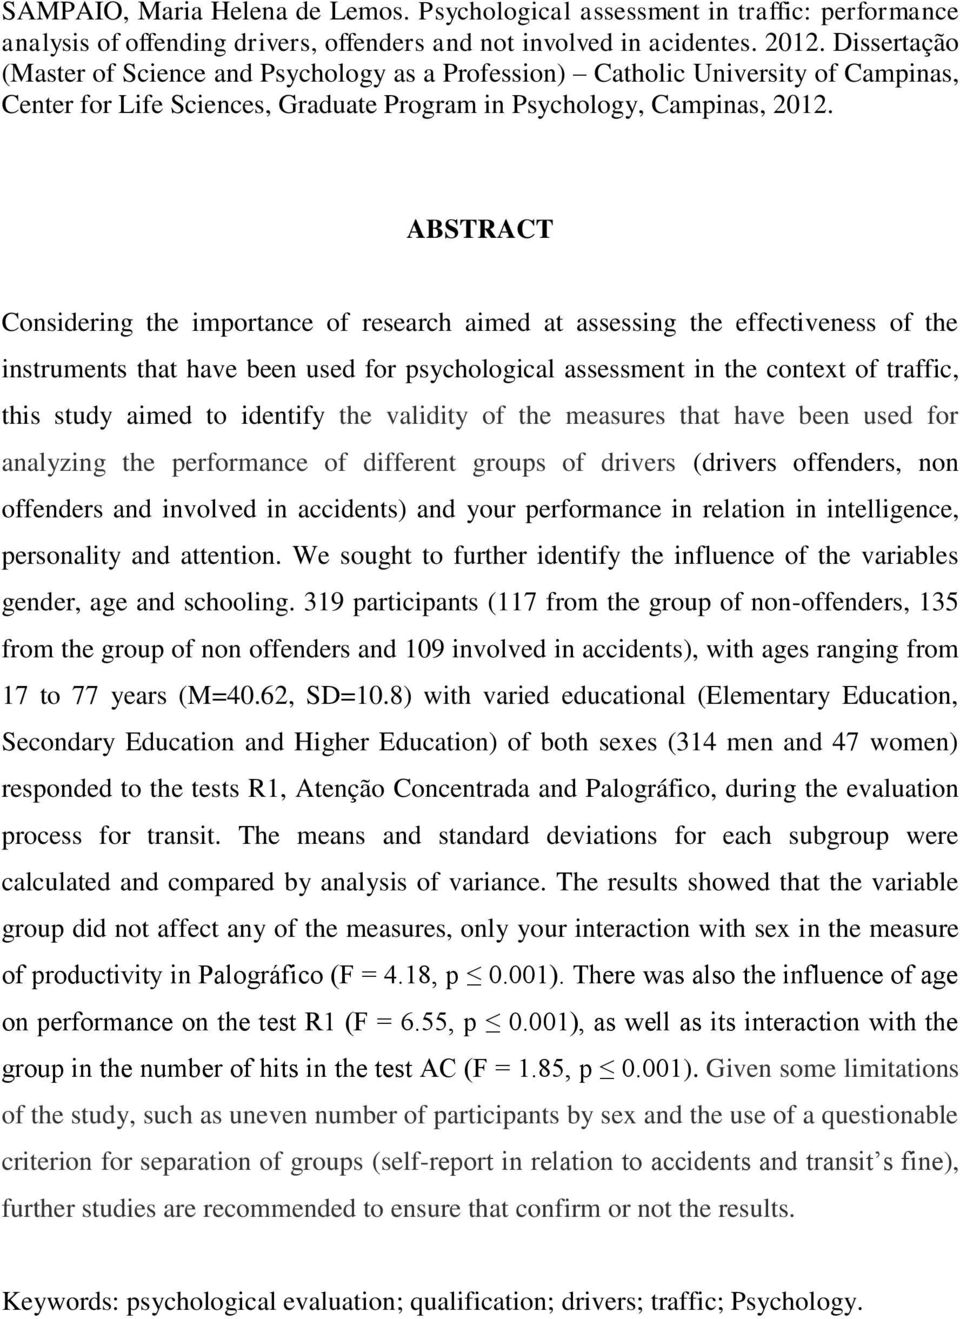 ABSTRACT Considering the importance of research aimed at assessing the effectiveness of the instruments that have been used for psychological assessment in the context of traffic, this study aimed to